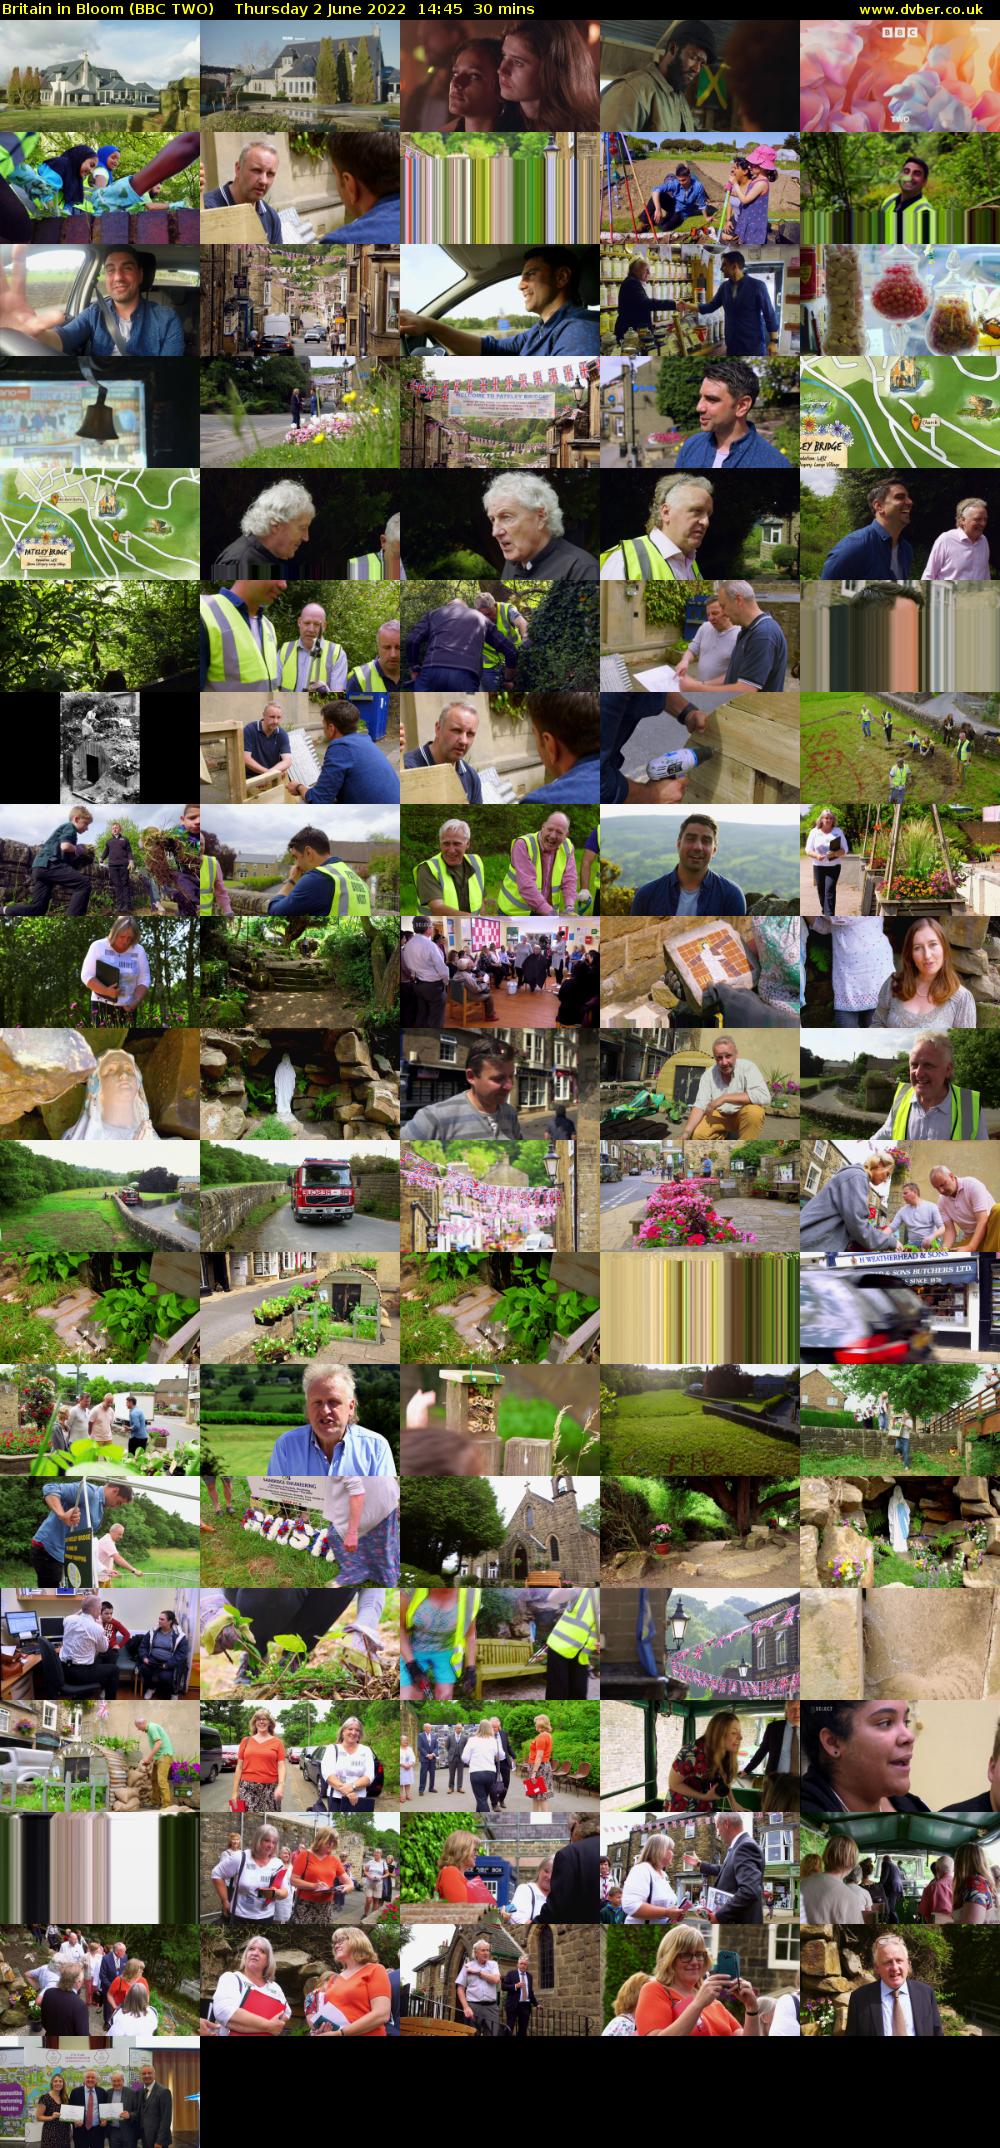 Britain in Bloom (BBC TWO) Thursday 2 June 2022 14:45 - 15:15